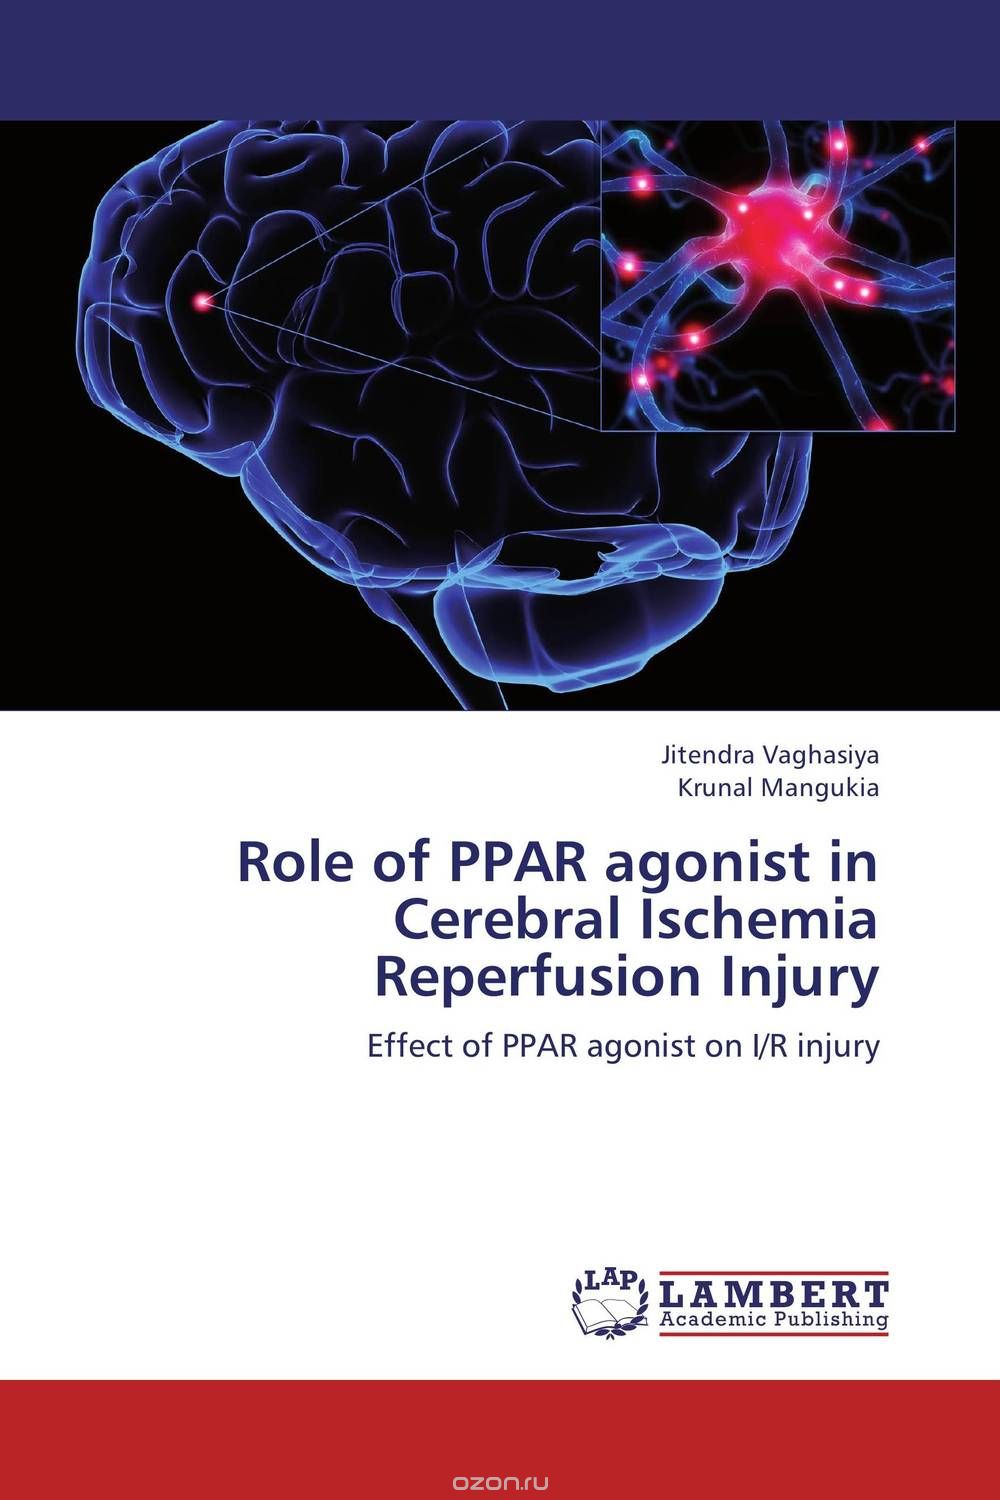 Role of PPAR agonist in Cerebral Ischemia Reperfusion Injury